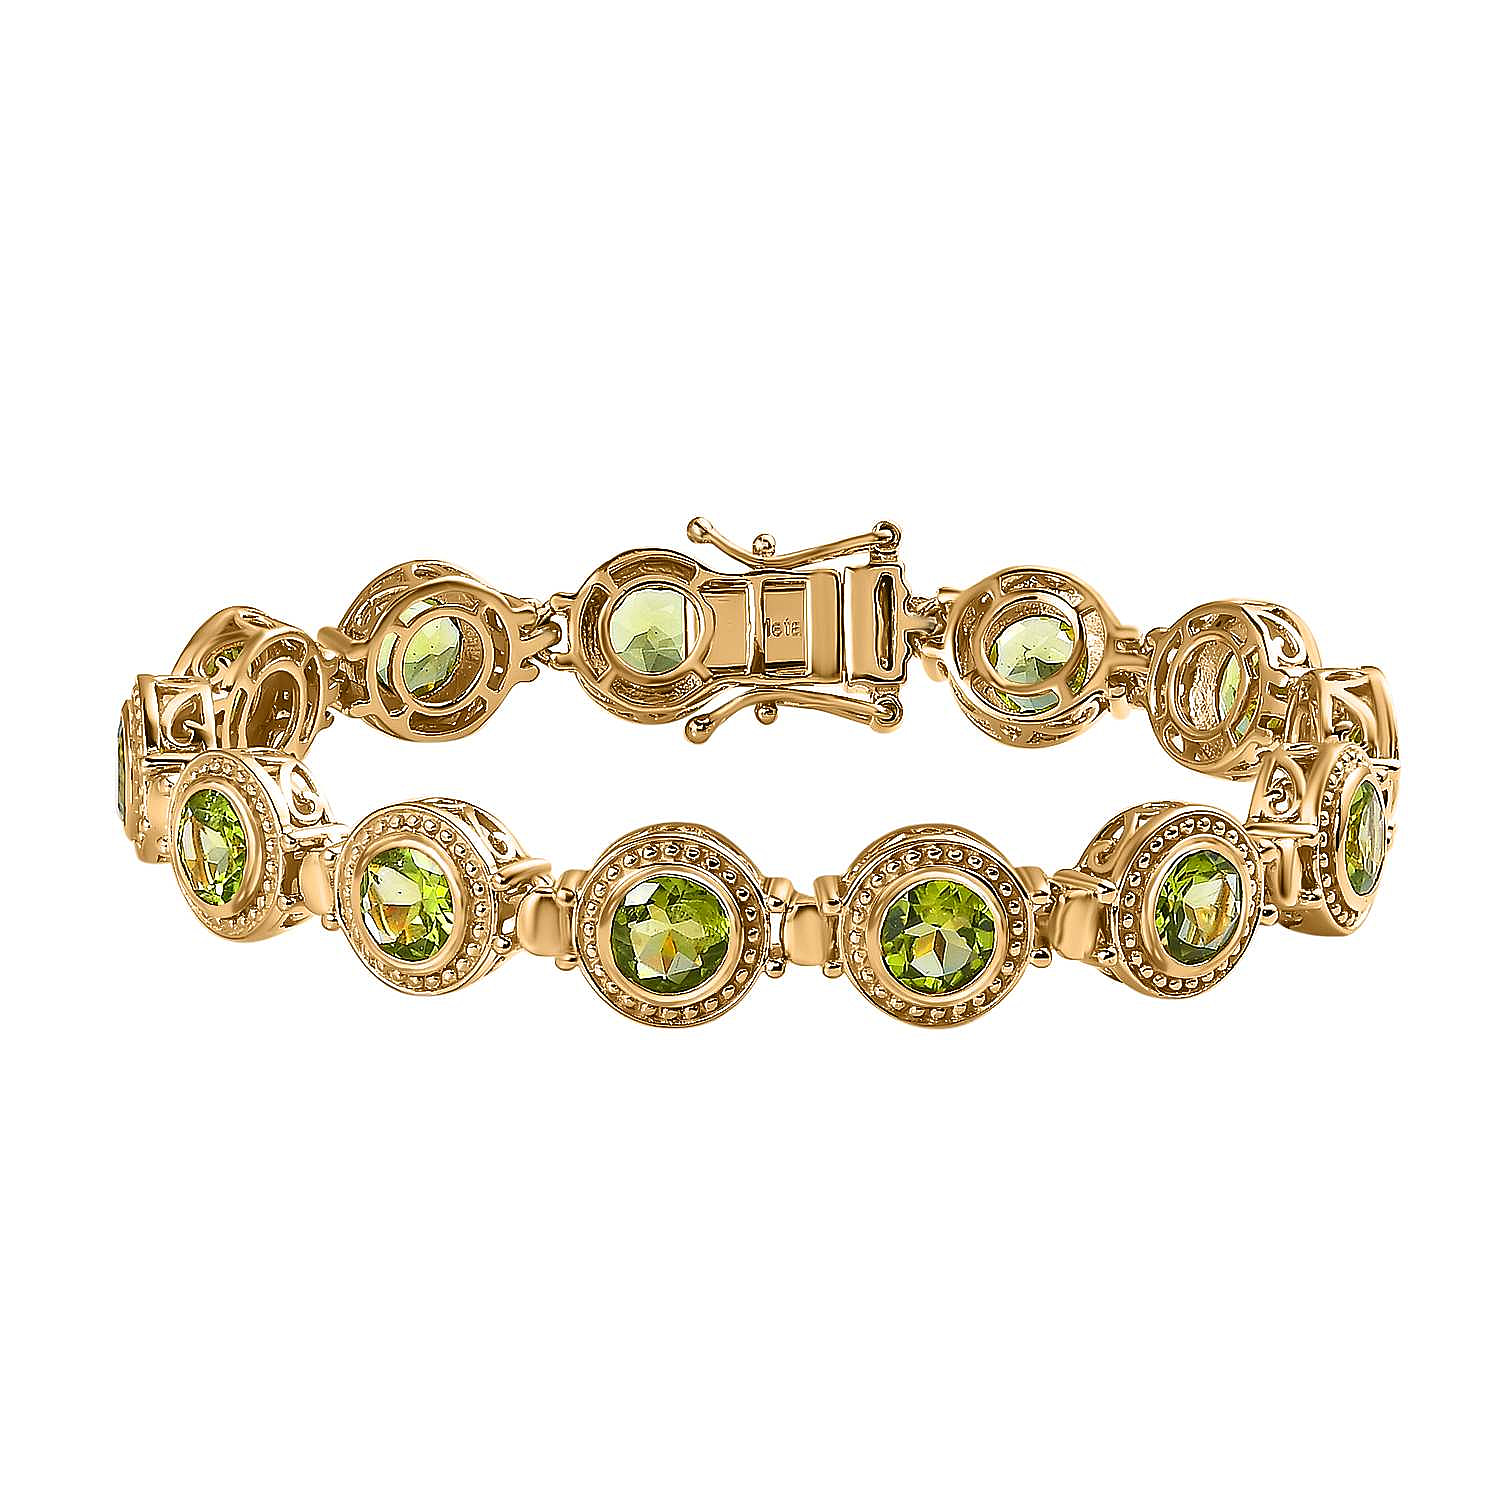 Hebei Peridot Bracelet (Size - 8) in 18K Vermeil Yellow Gold Plated Sterling Silver 11.91 Ct, Silver Wt. 20.89 Gms